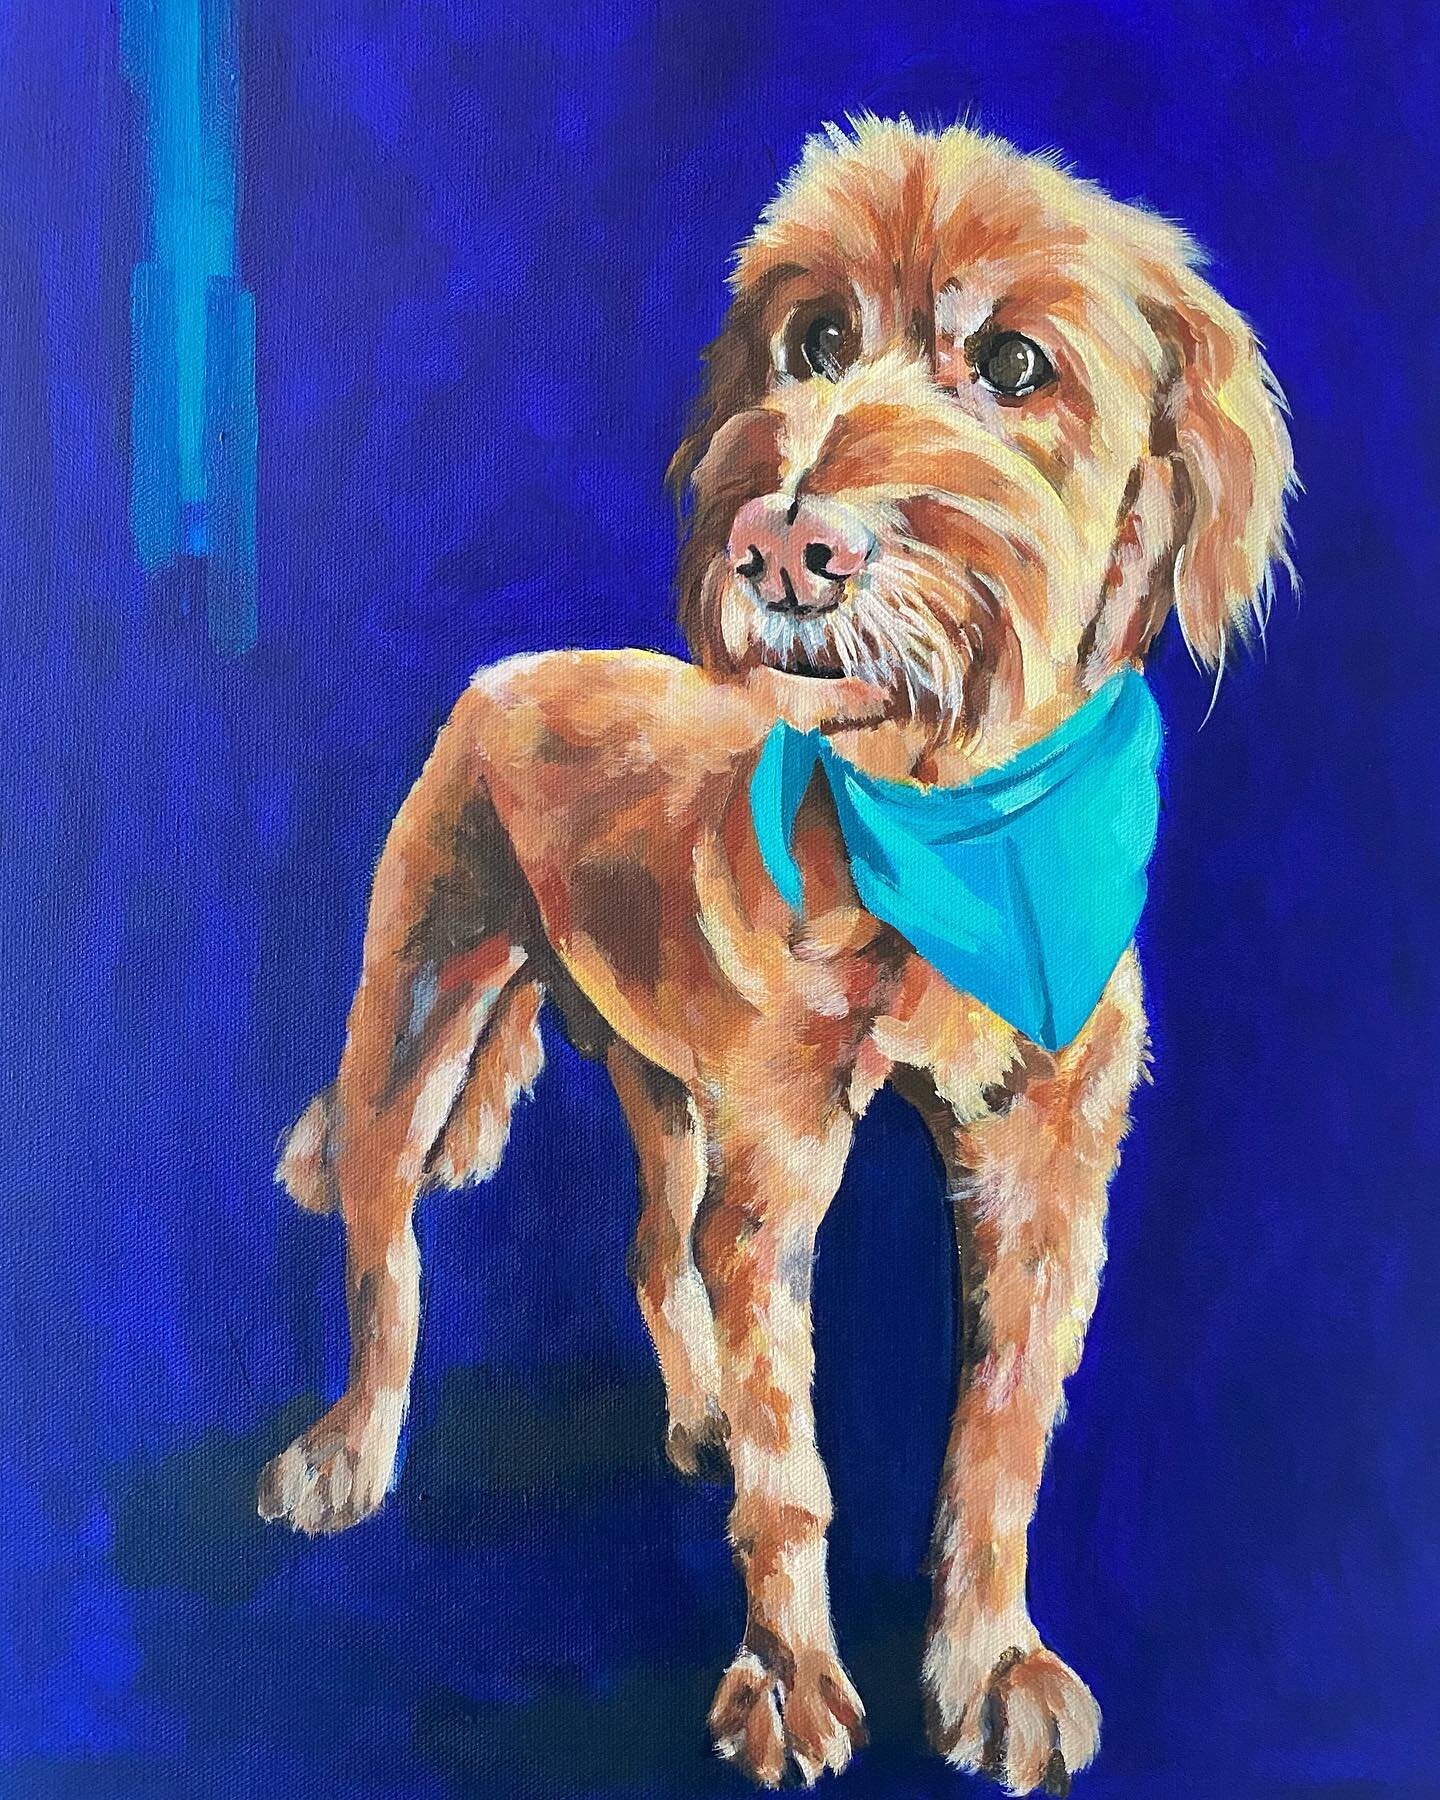 Blaze
Acrylic on canvas
16x20 
I loved using the ultramarine blue for the background. Thought the color brought out Blaze&rsquo;s lovely fur coat.
message me for commissions